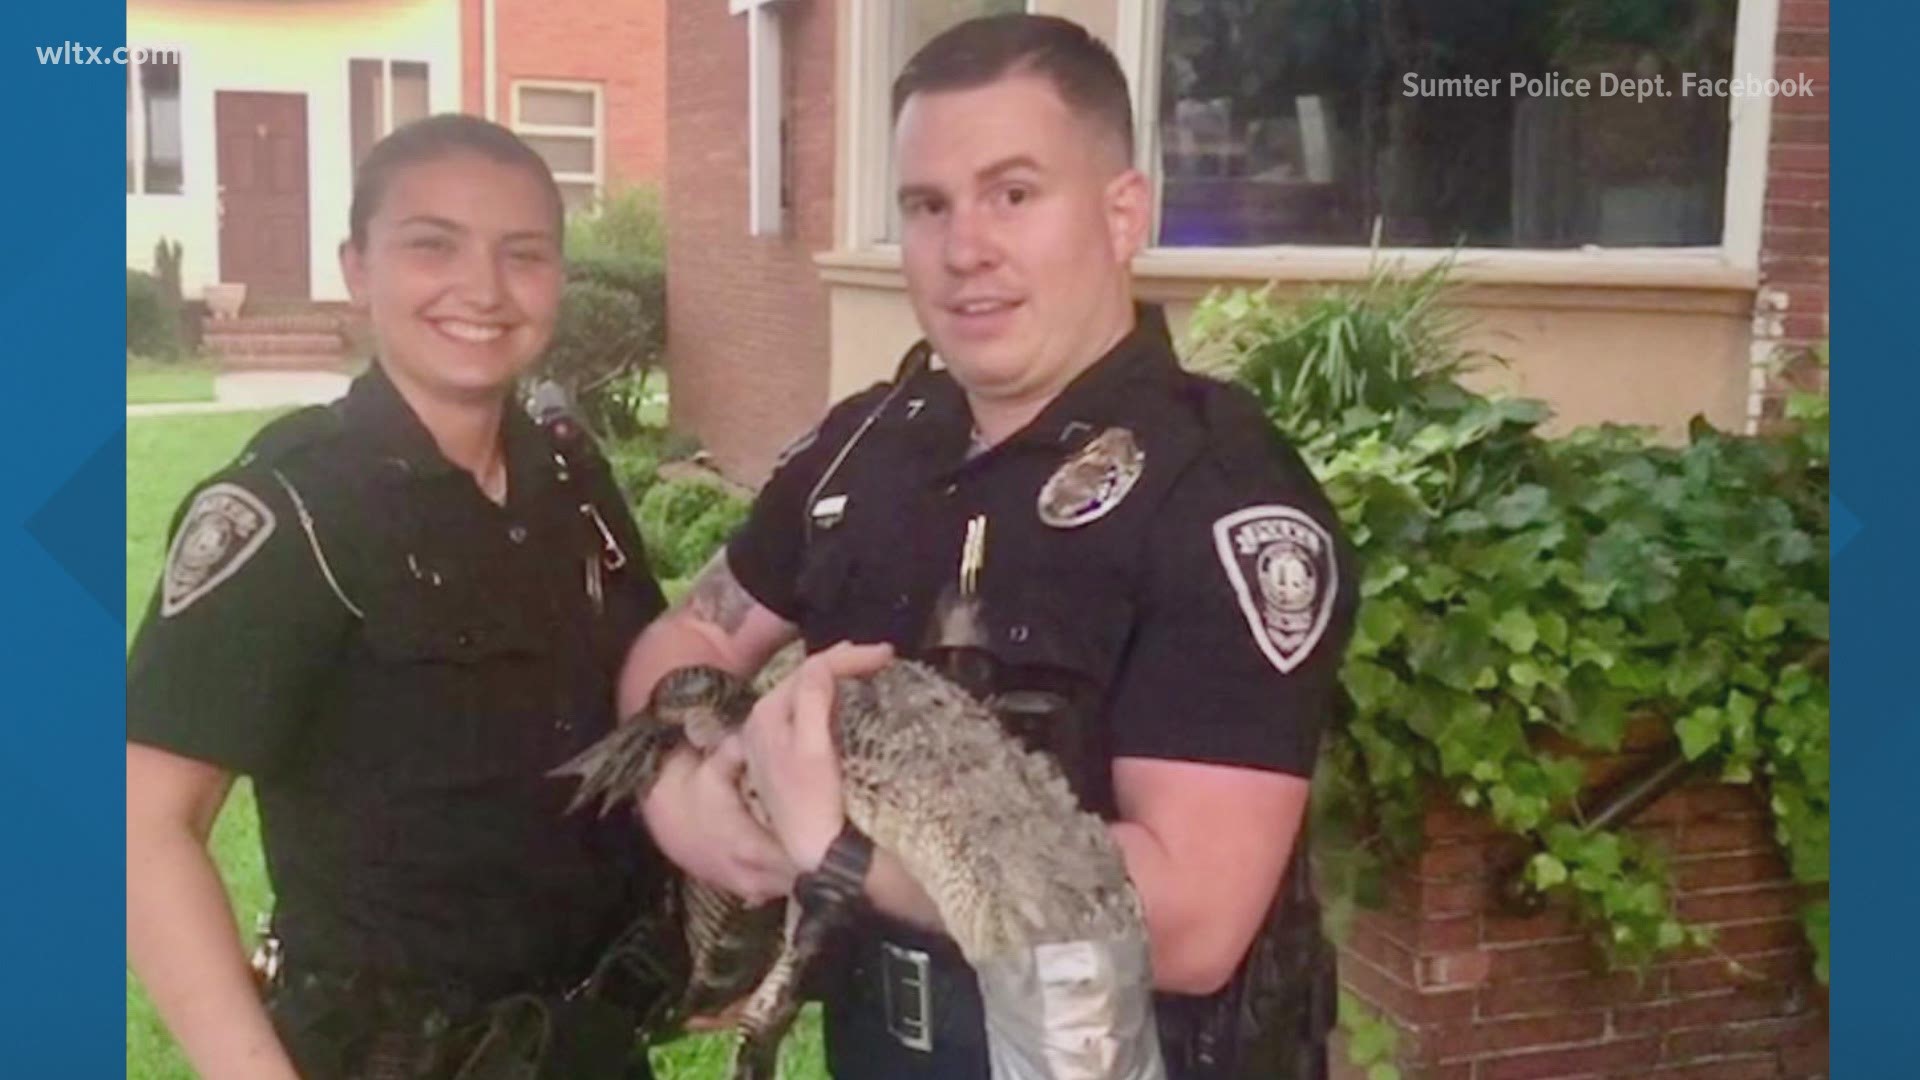 Two officers managed to wrestle the fellow safely to a better location after it was found lurking on South Main Street in Sumter, SC.